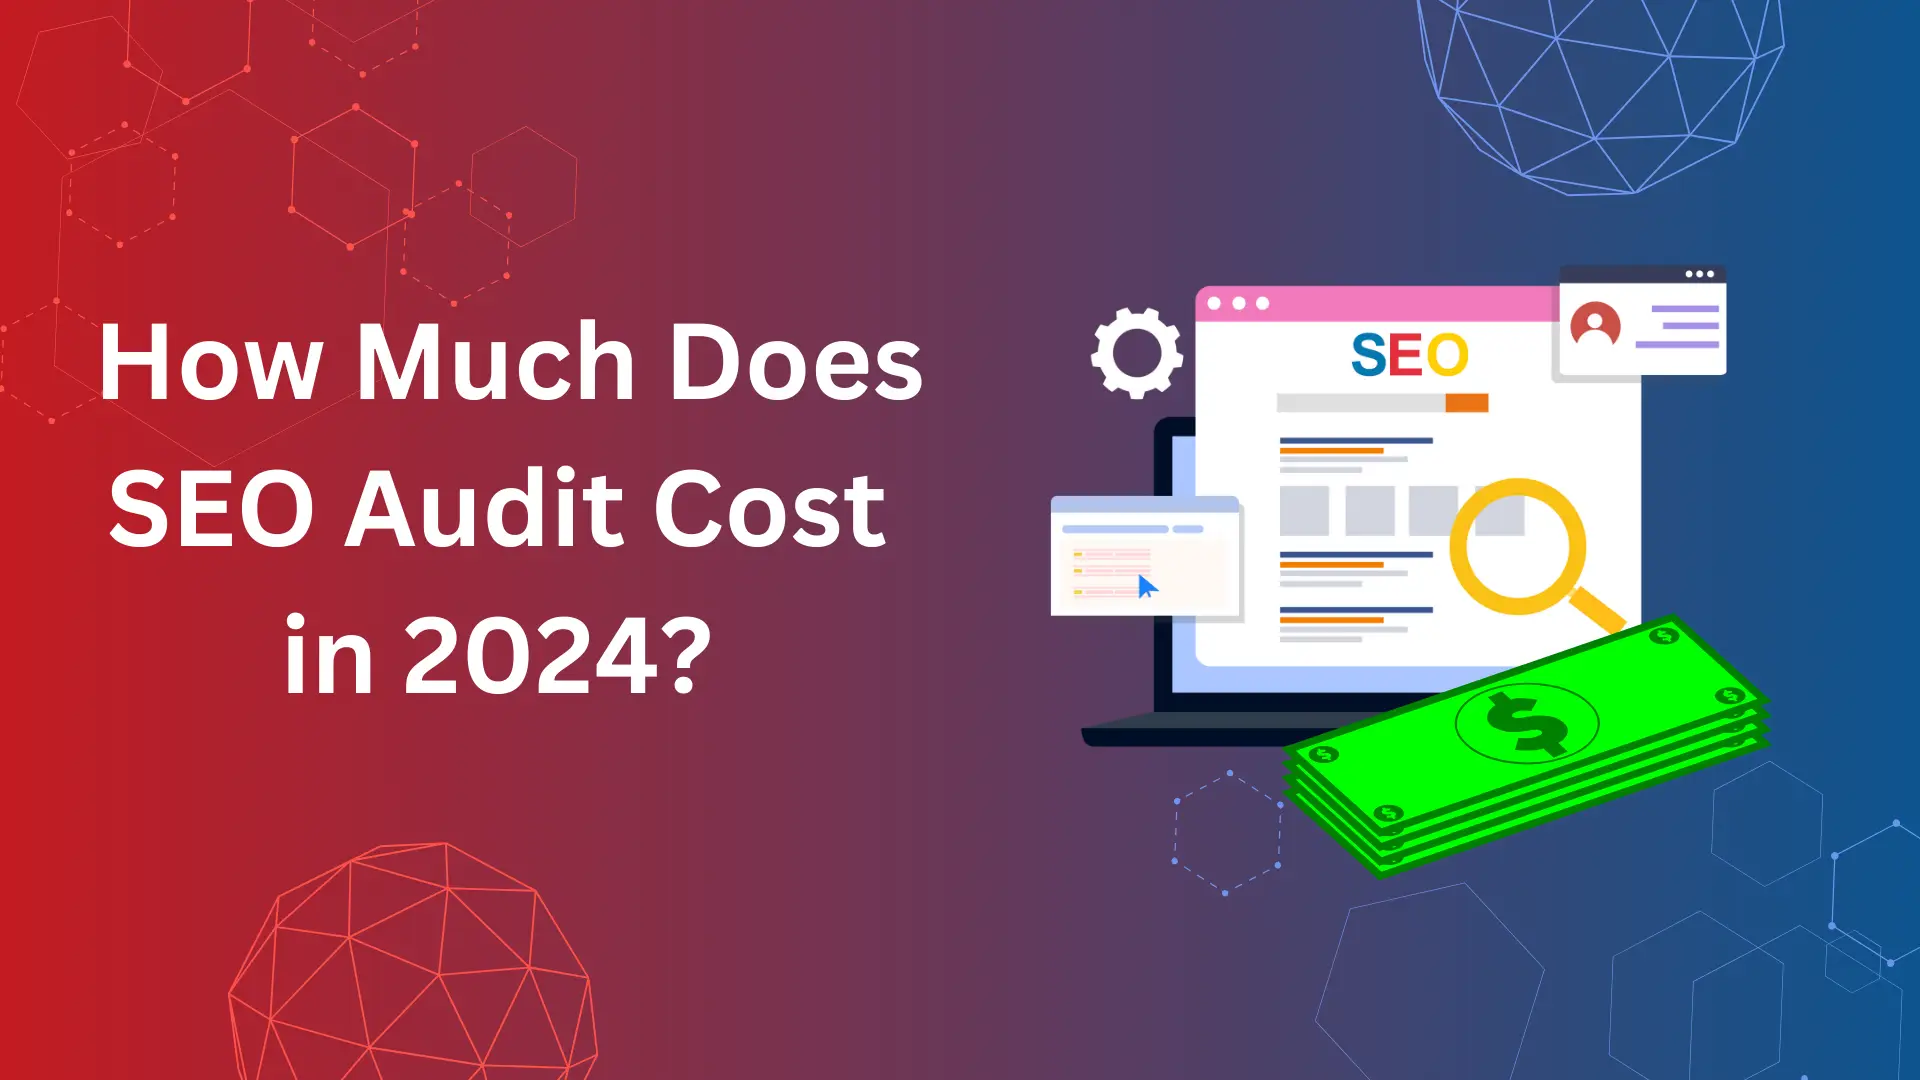 How Much Does SEO Audit Cost in 2024